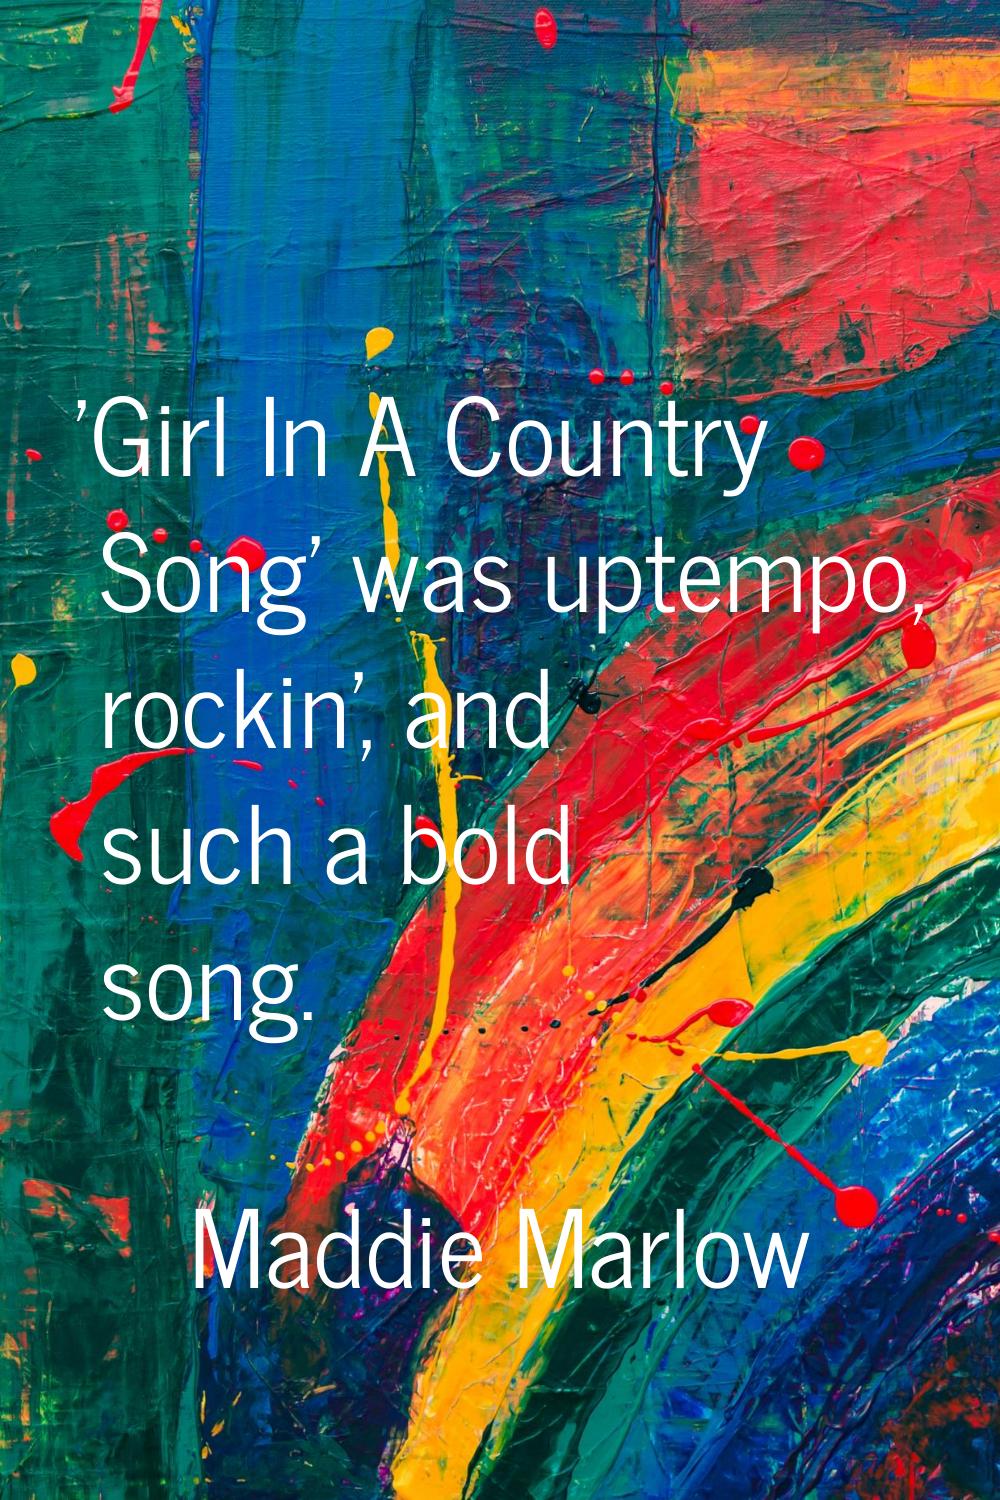 'Girl In A Country Song' was uptempo, rockin', and such a bold song.